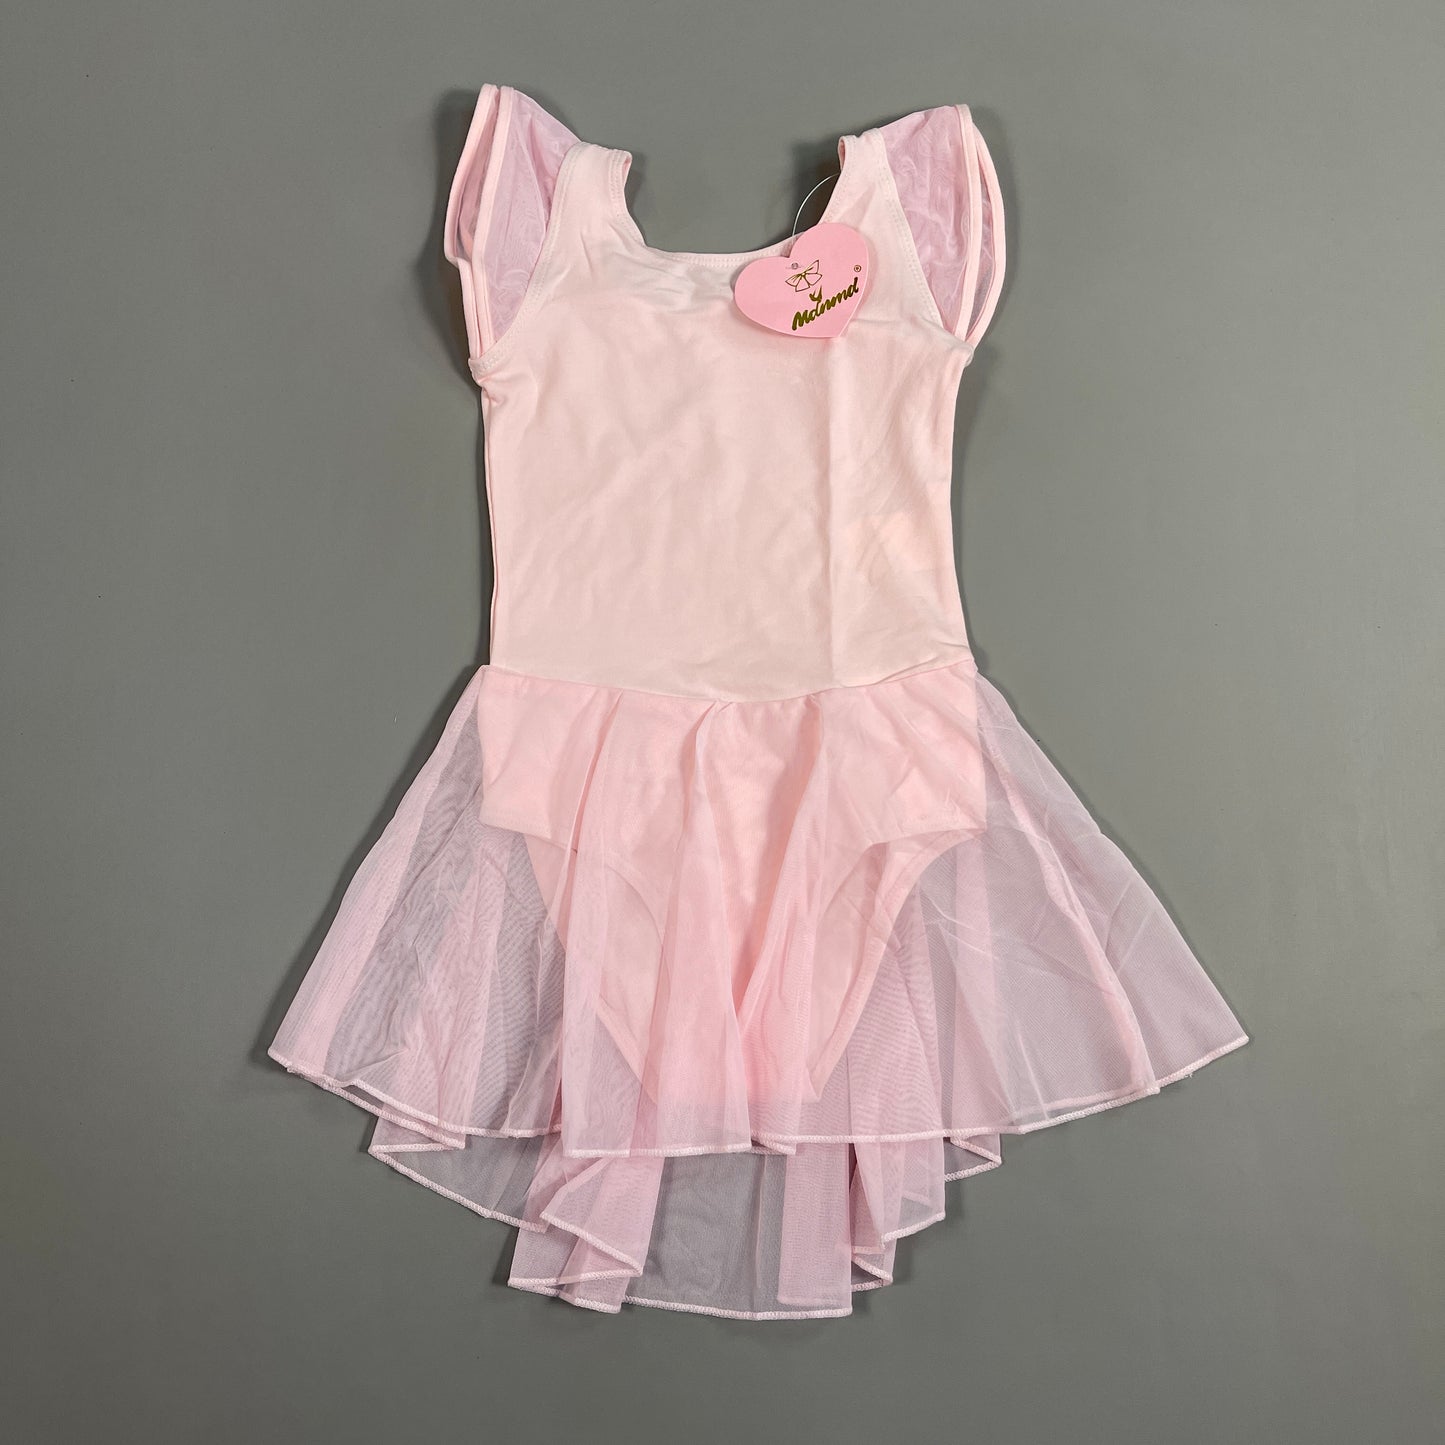 MDNMD Toddler Girls Ballet, Dance, Gymnastic, Leotard Flutter Sleeve Outfit With Skirt Sz 5 Pink (New)